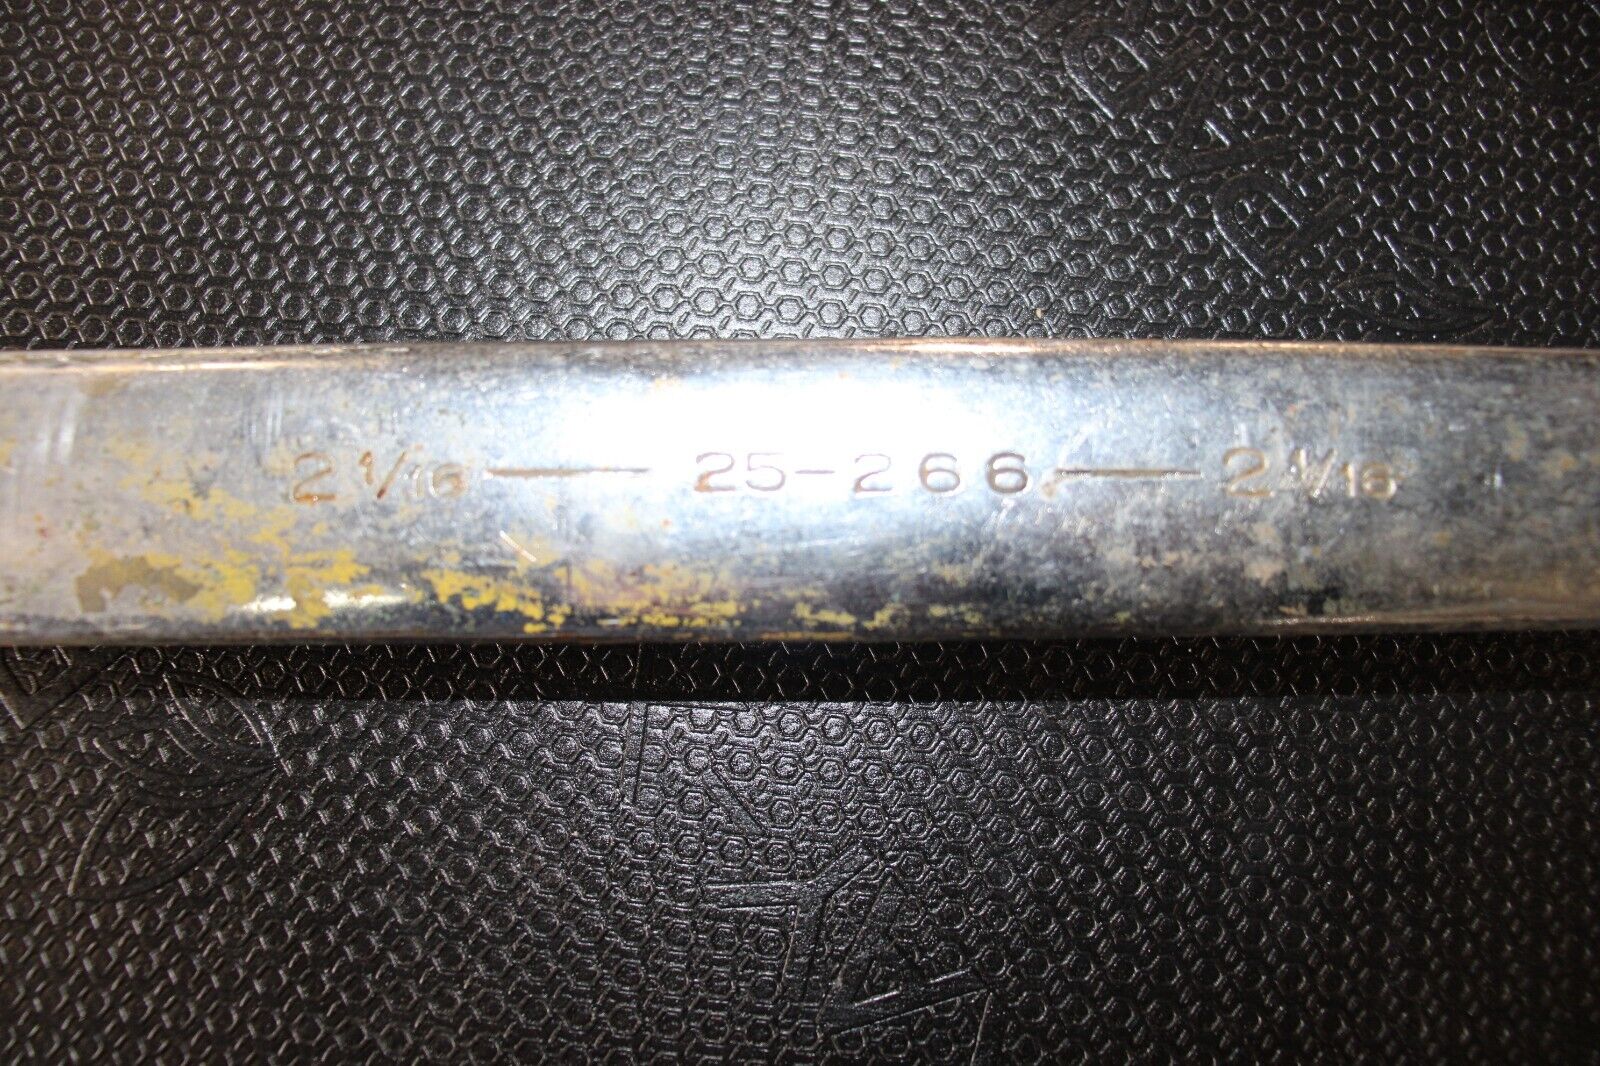 2 1/16 COMBINATION WRENCH ARMSTRONG 25-266